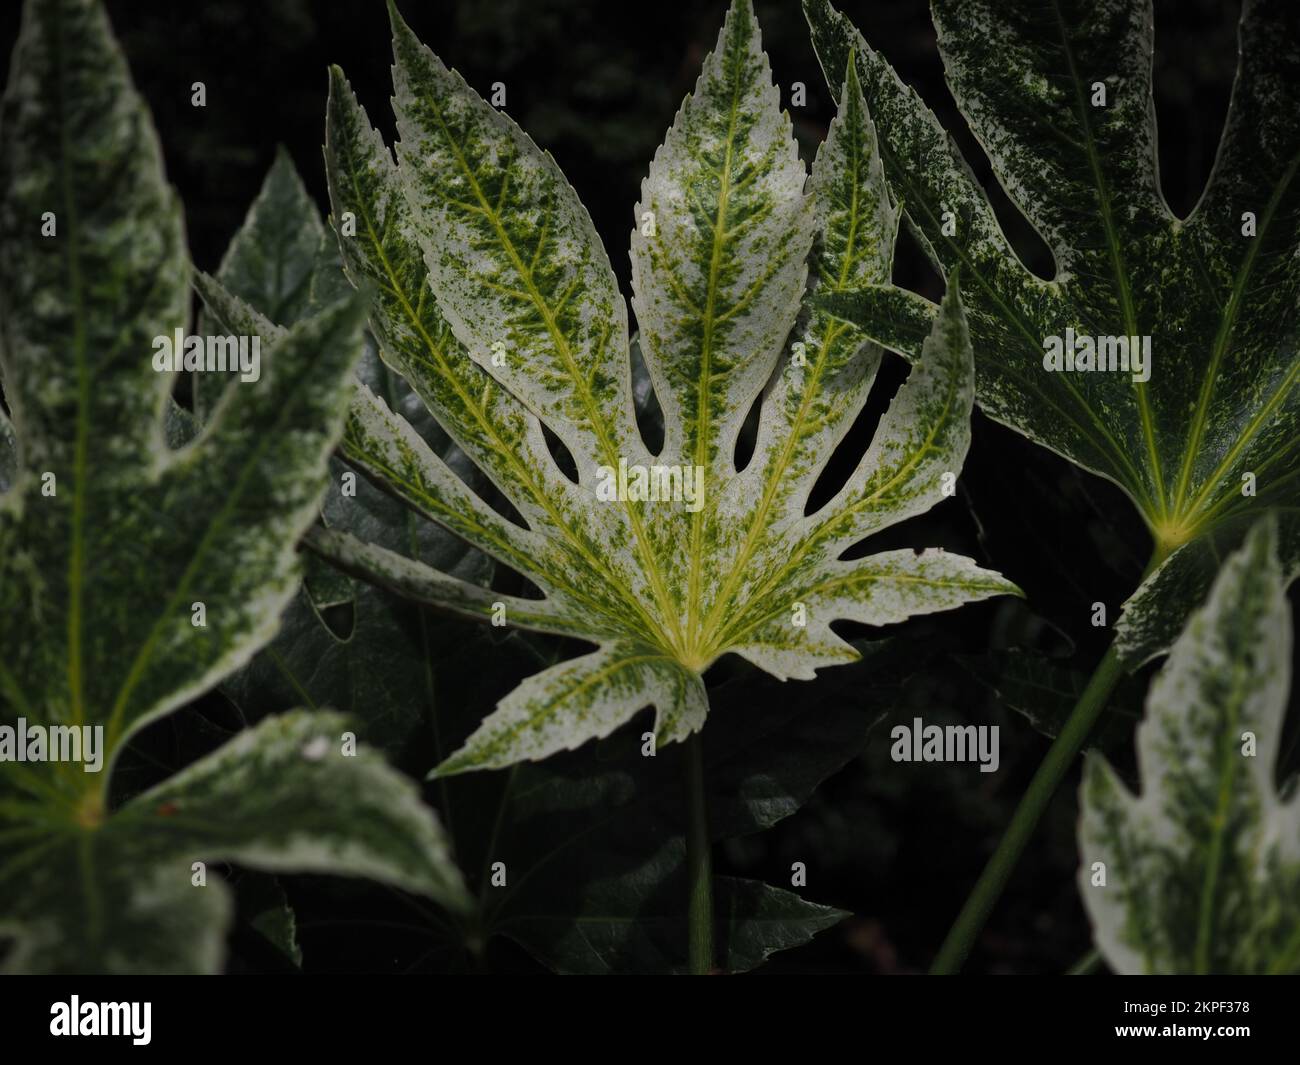 Close up of the variegated leaves of Fatsia japonica 'Spider's Web' (Caster oil plant) against a dark background Stock Photo